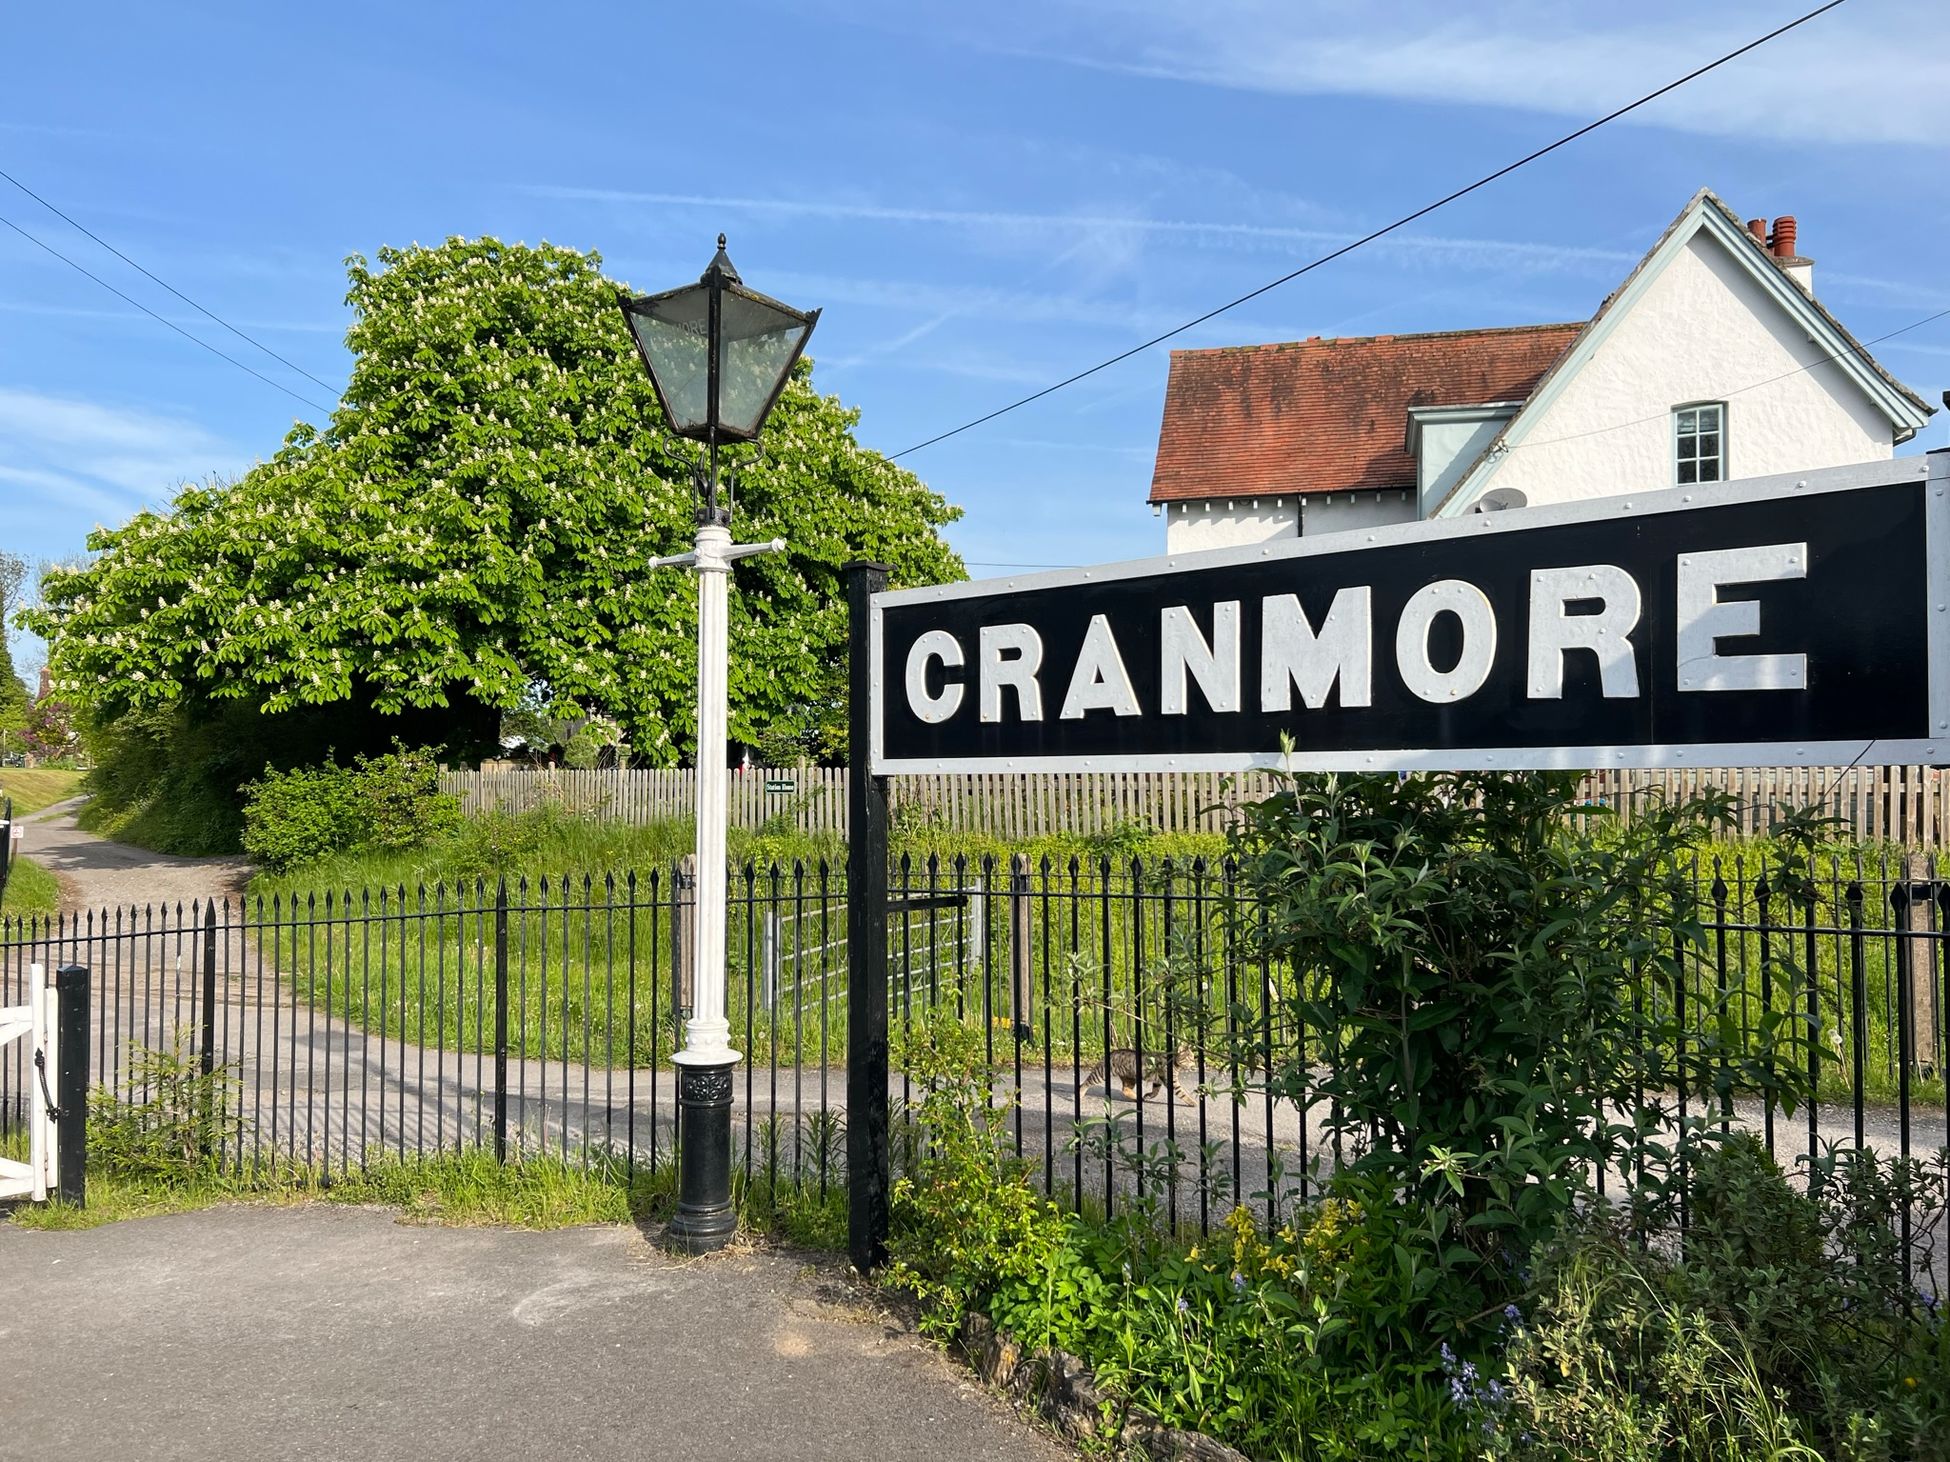 Sign at Cranmore Railway Station on a sunny day.